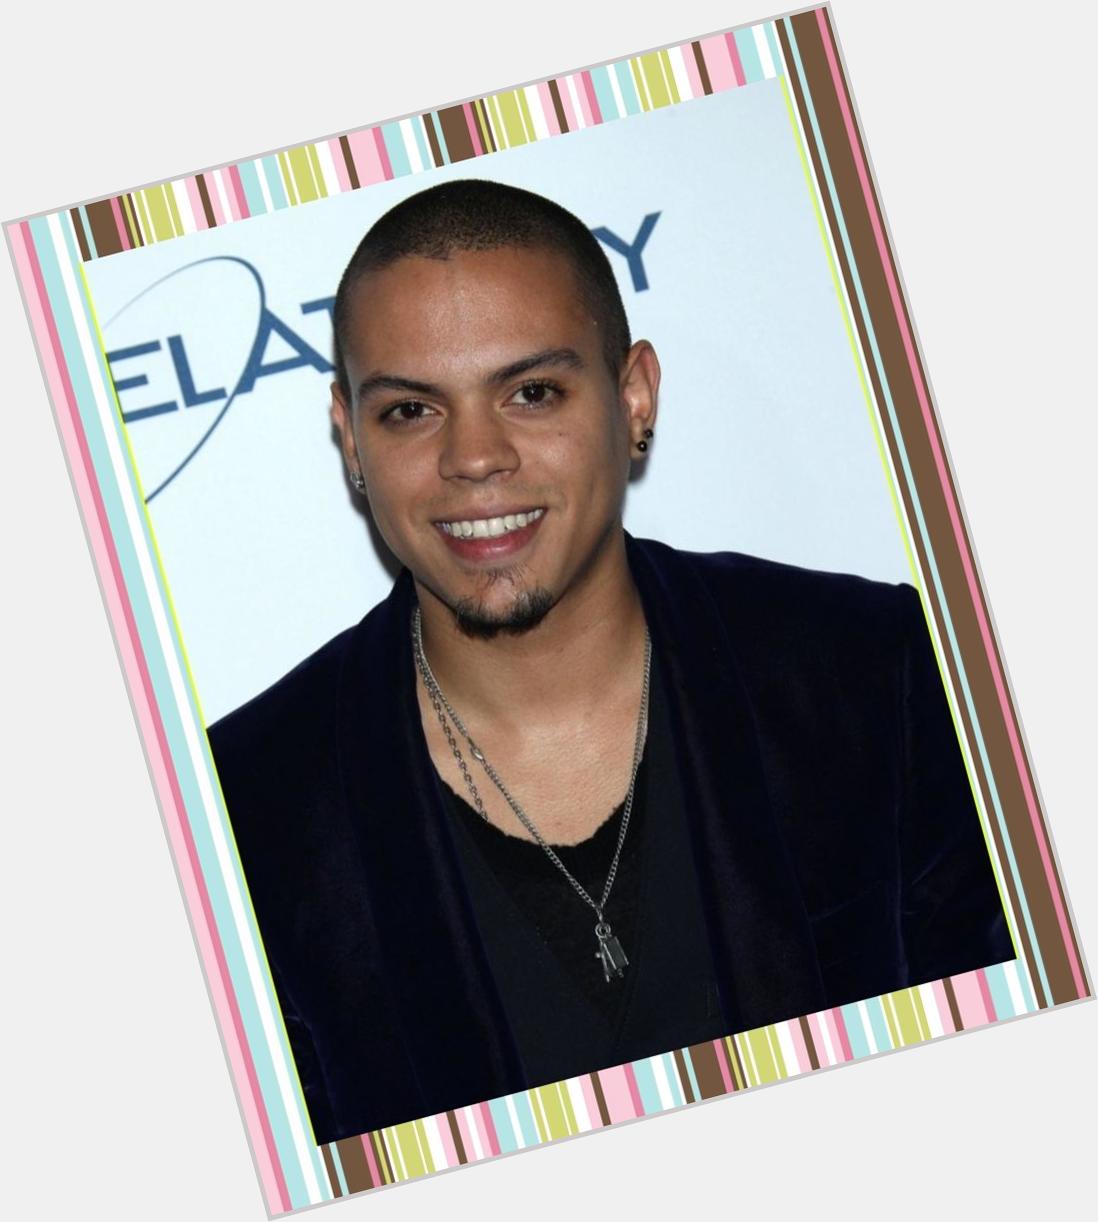   wishes Evan Ross, a very happy birthday  